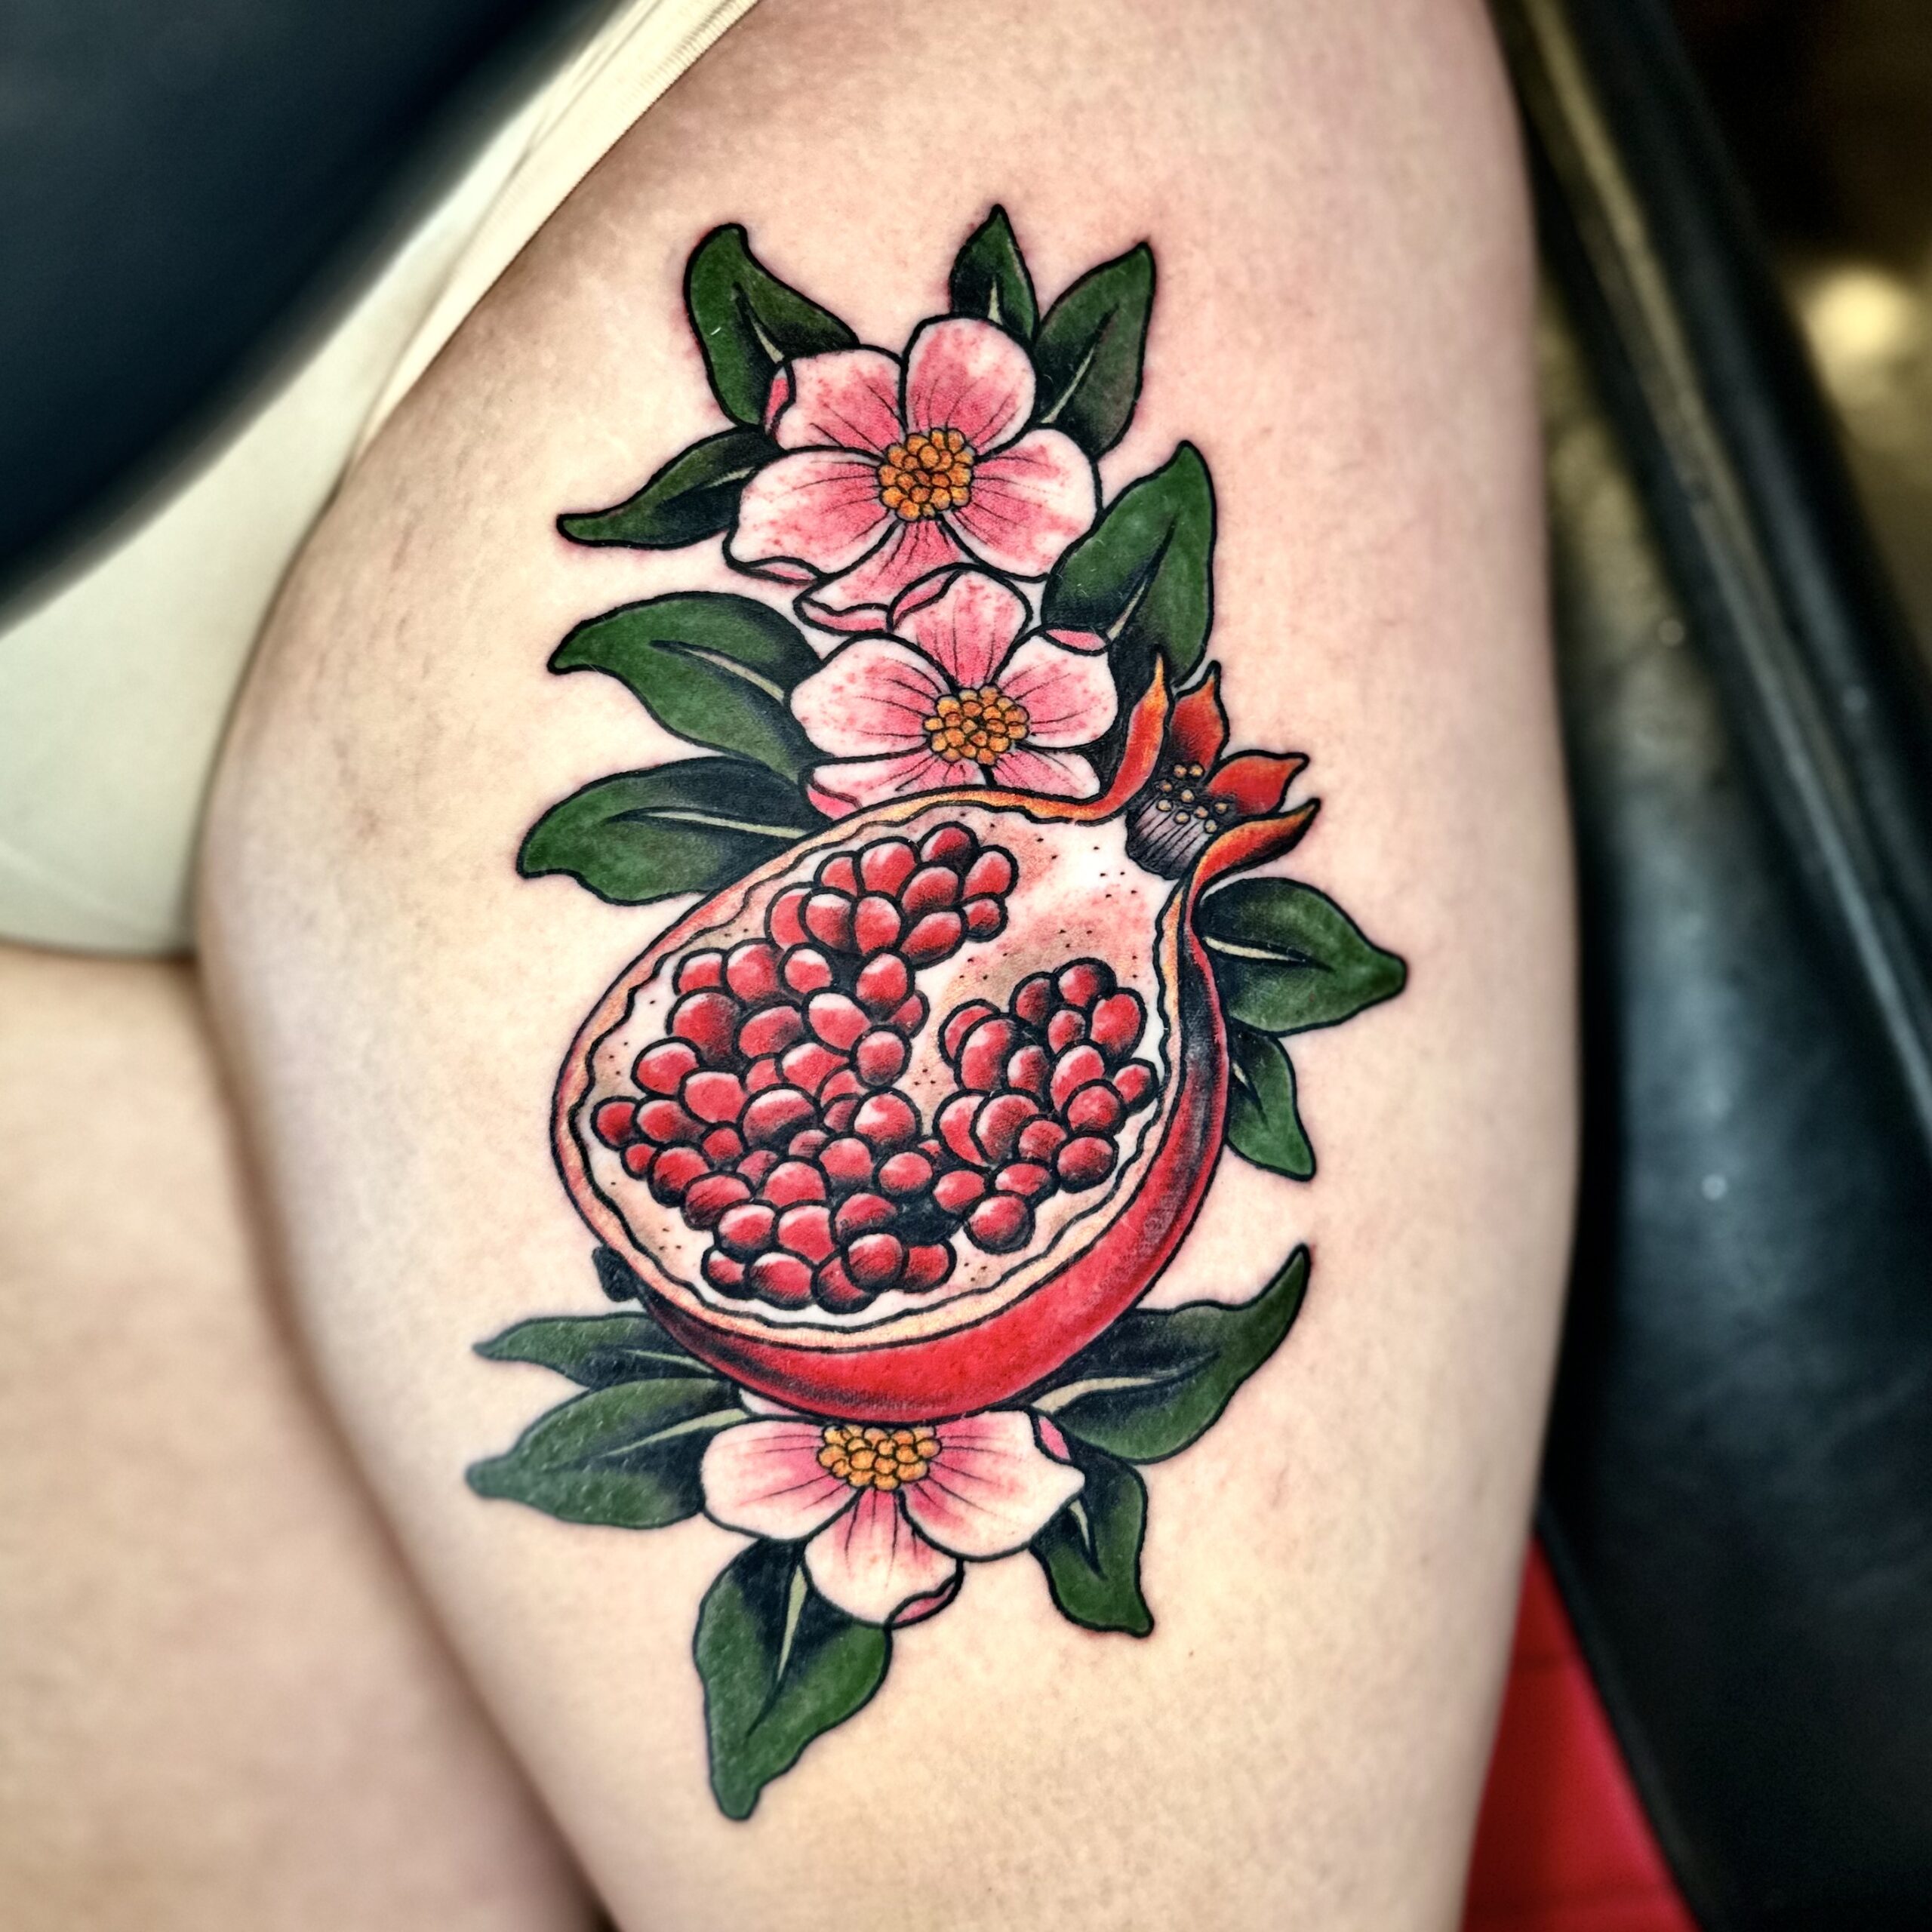 Tattoo of a pomegranate and pink flowers